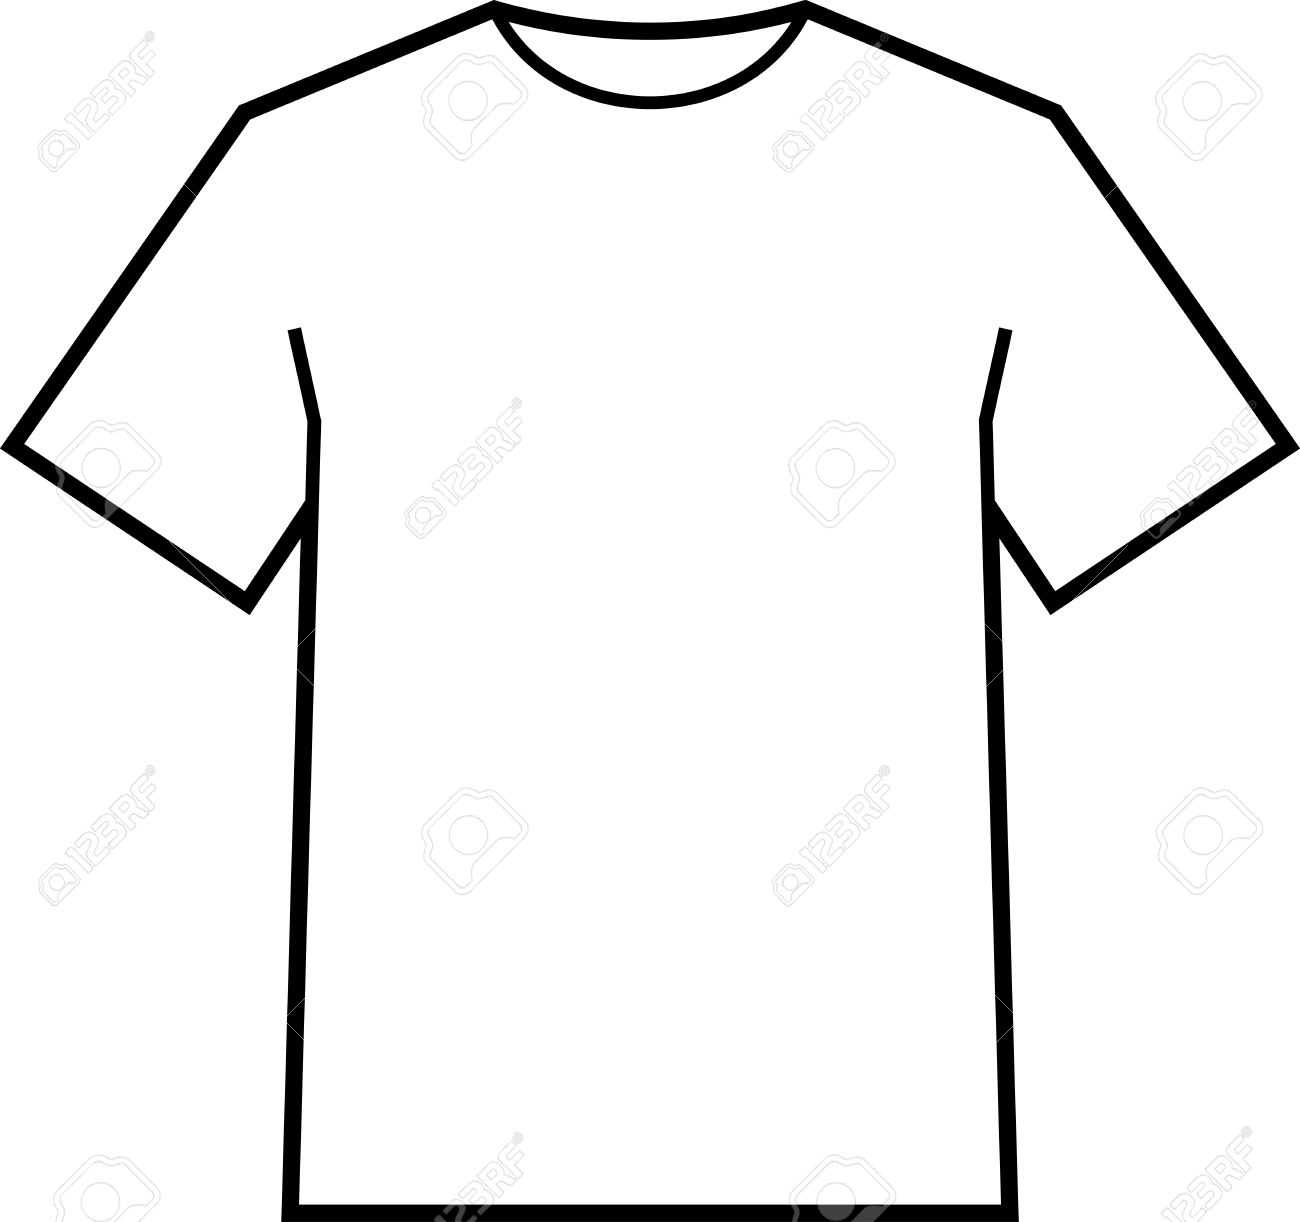 Blank T Shirt Template Vector With Blank T Shirt Outline Template